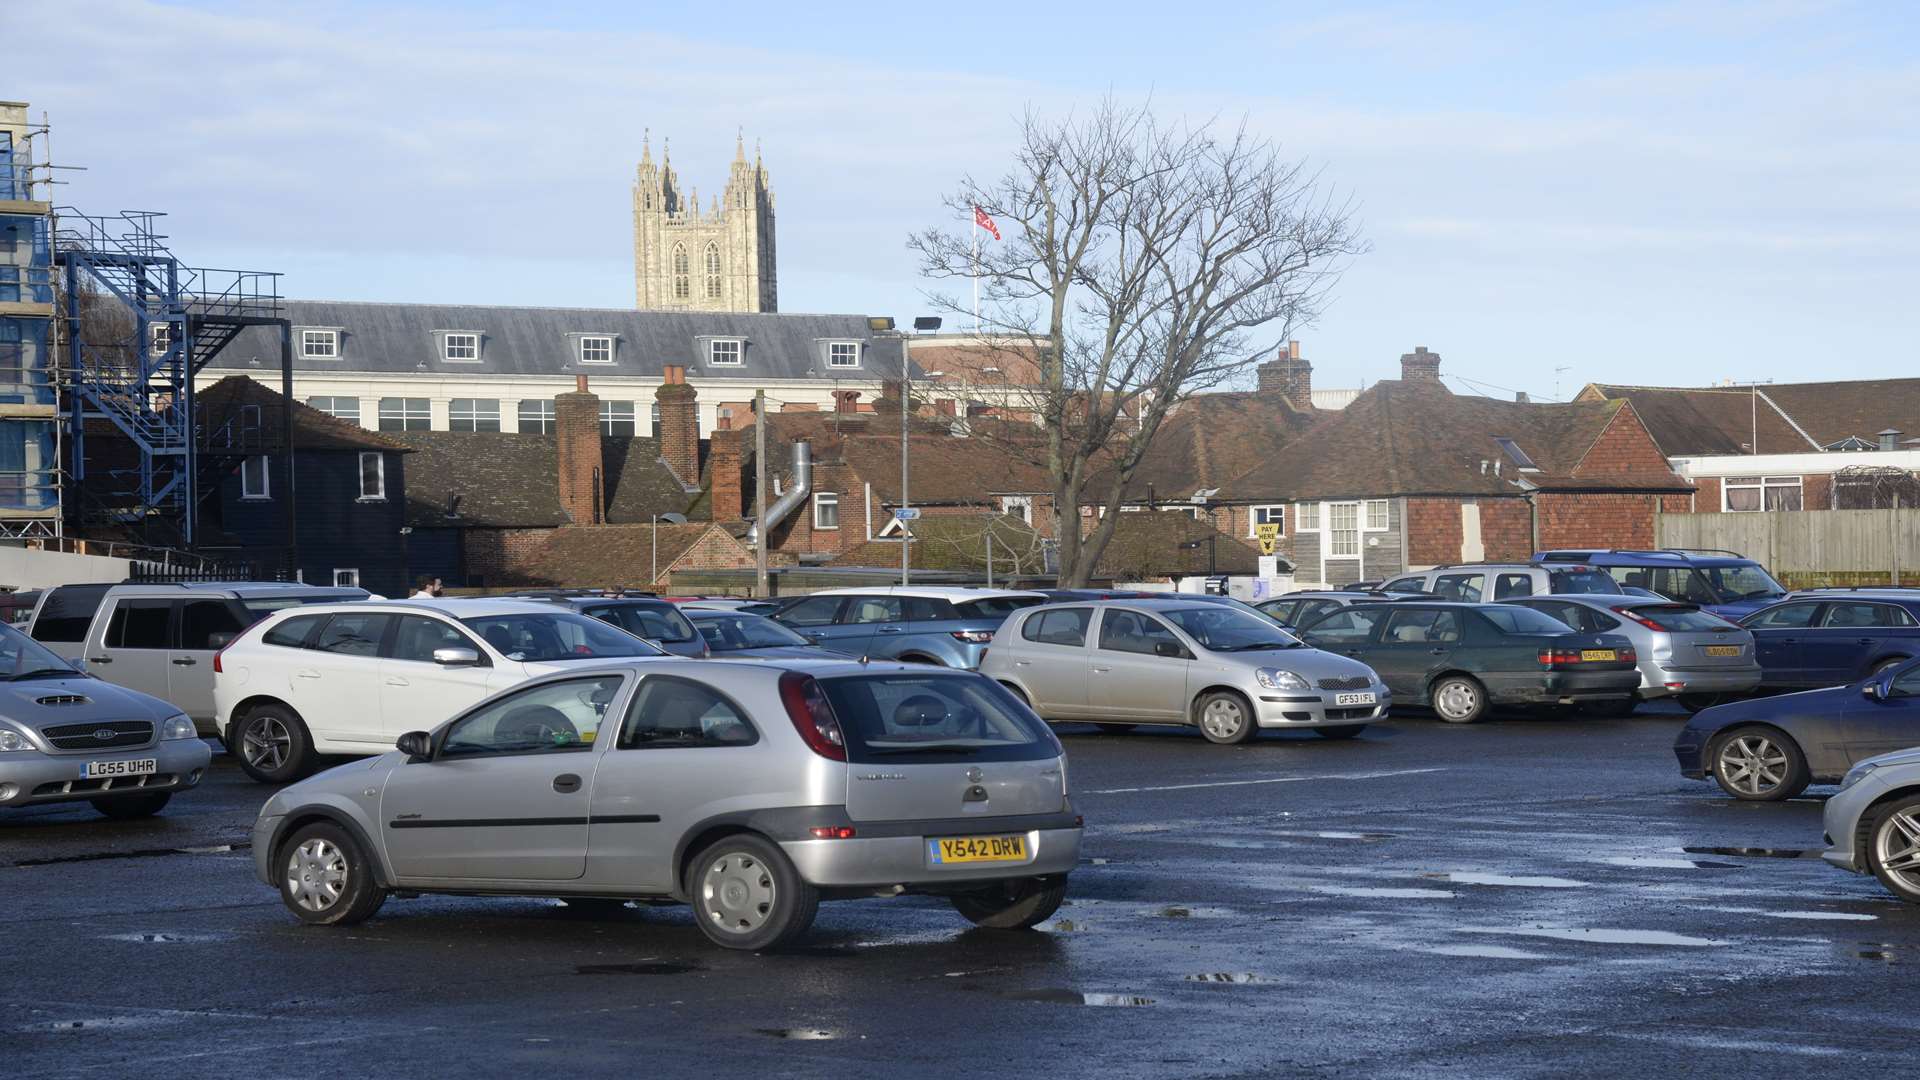 Holman's Meadow is among the car parks in Canterbury which will be used in the car club scheme.